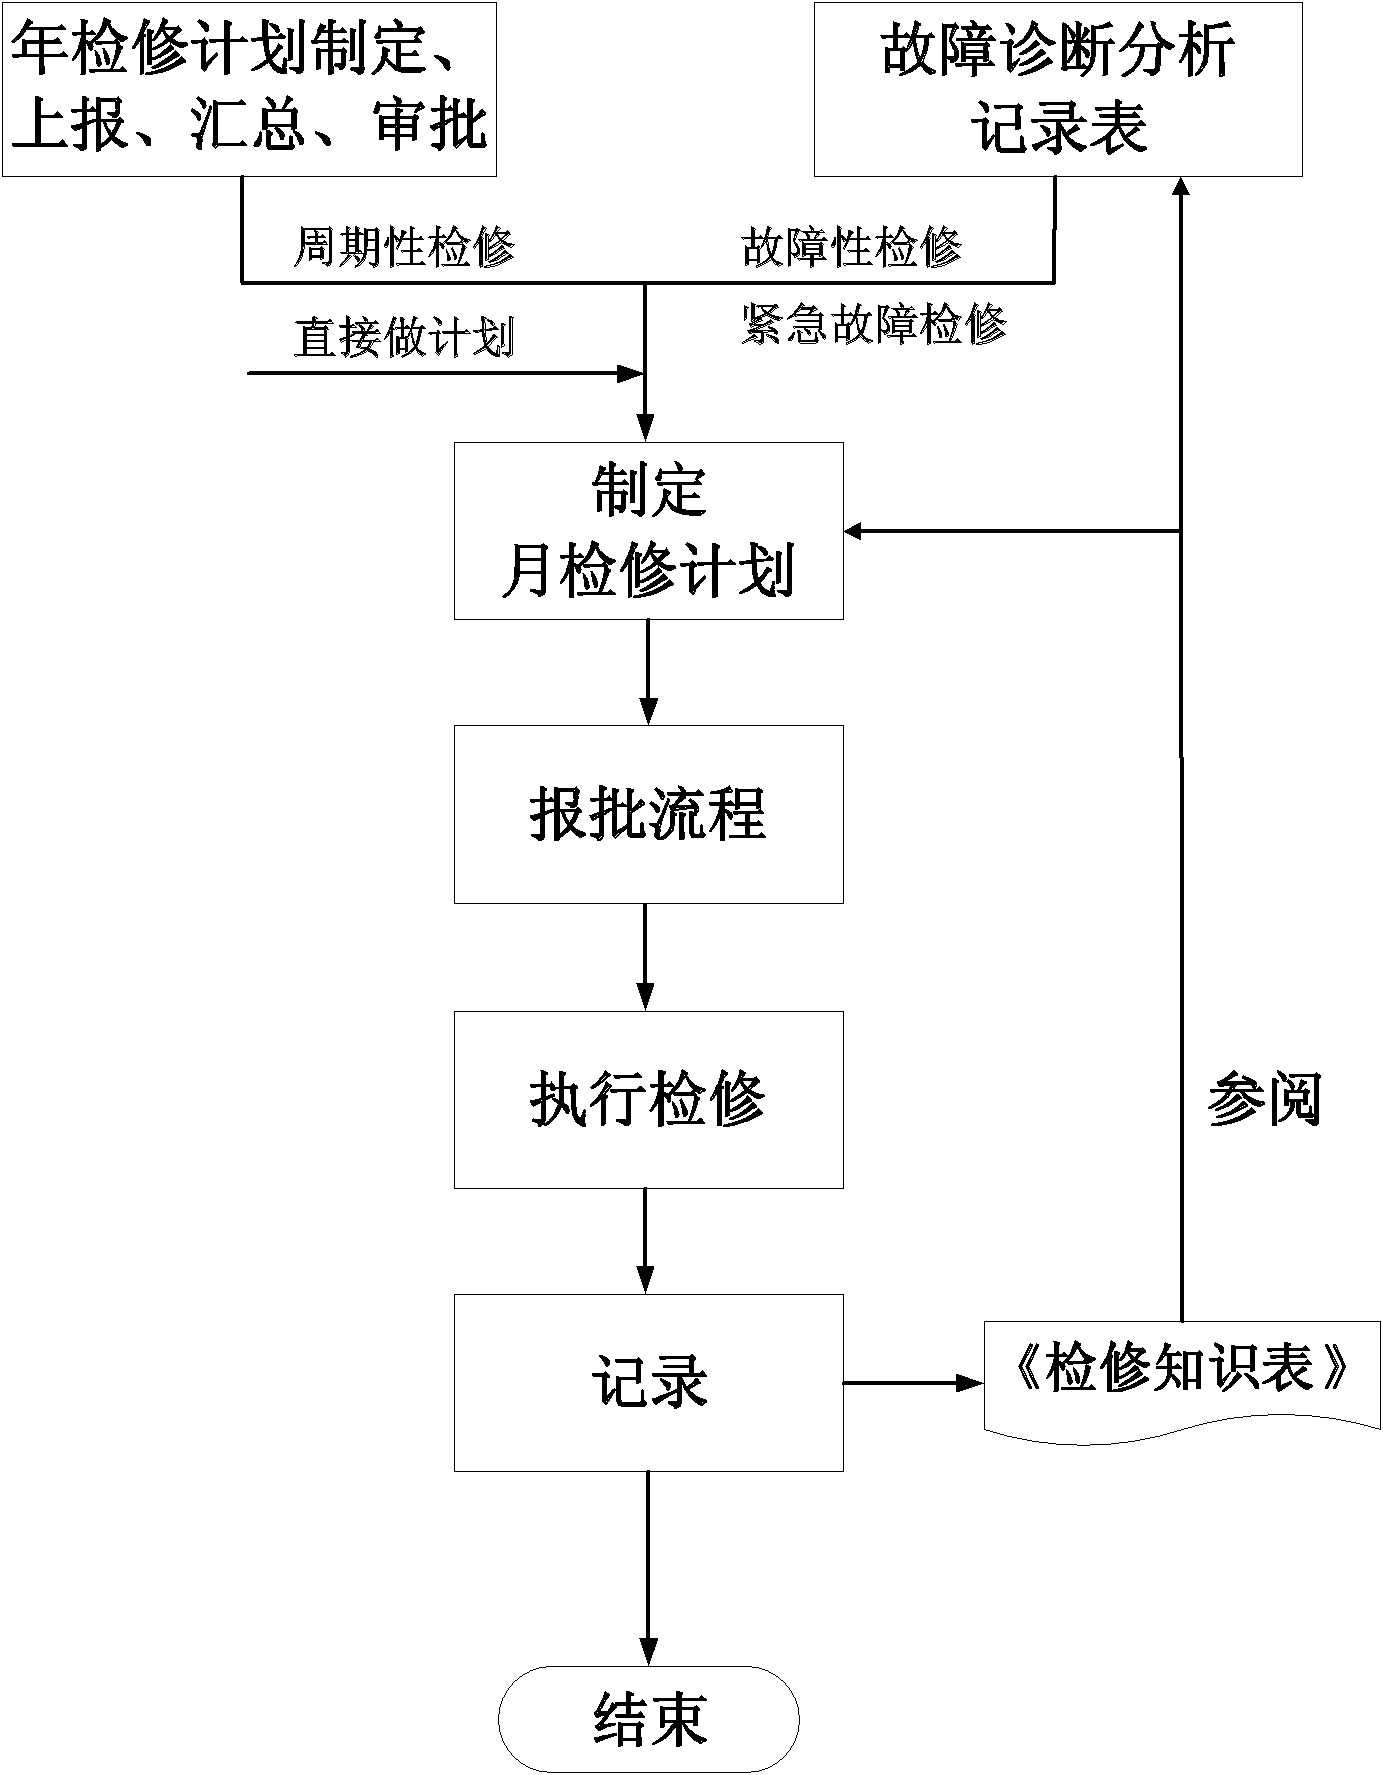 System for comprehensive arrangement and execution management of production equipment maintenance plan